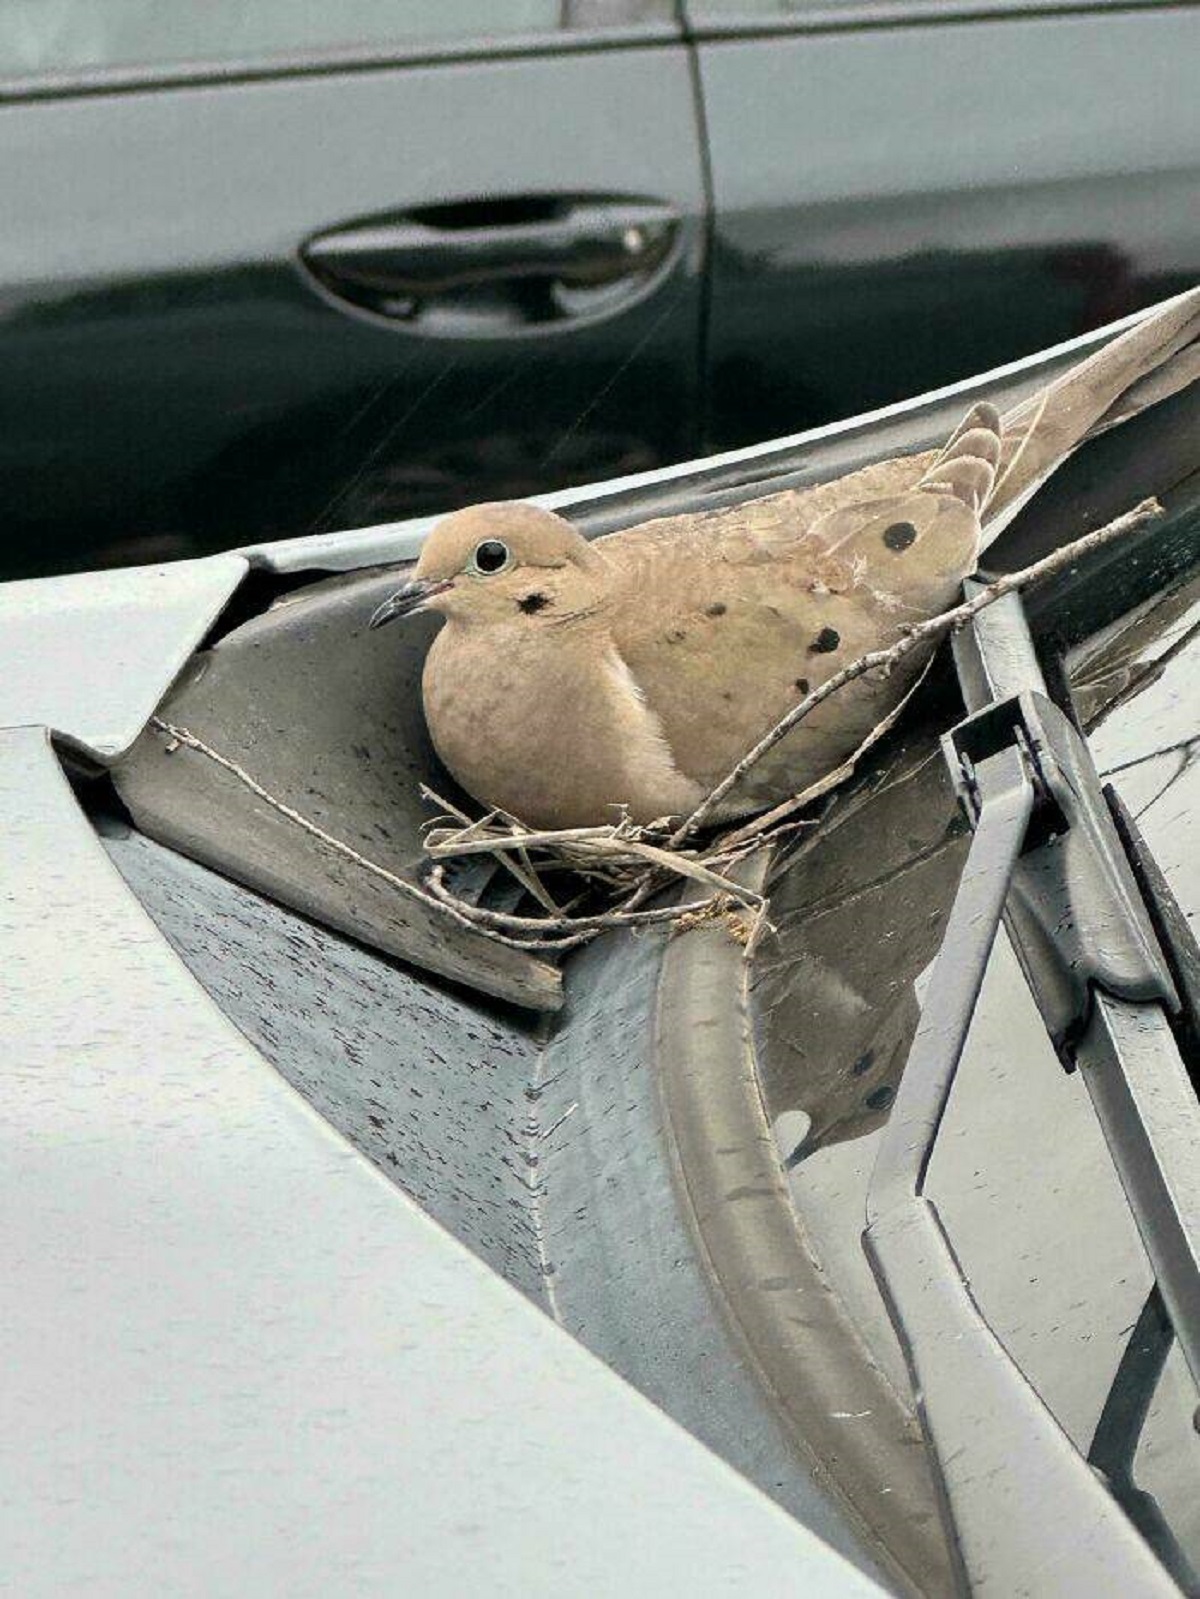 "A Bird Made A Nest On My Car While I Was At The Gym"